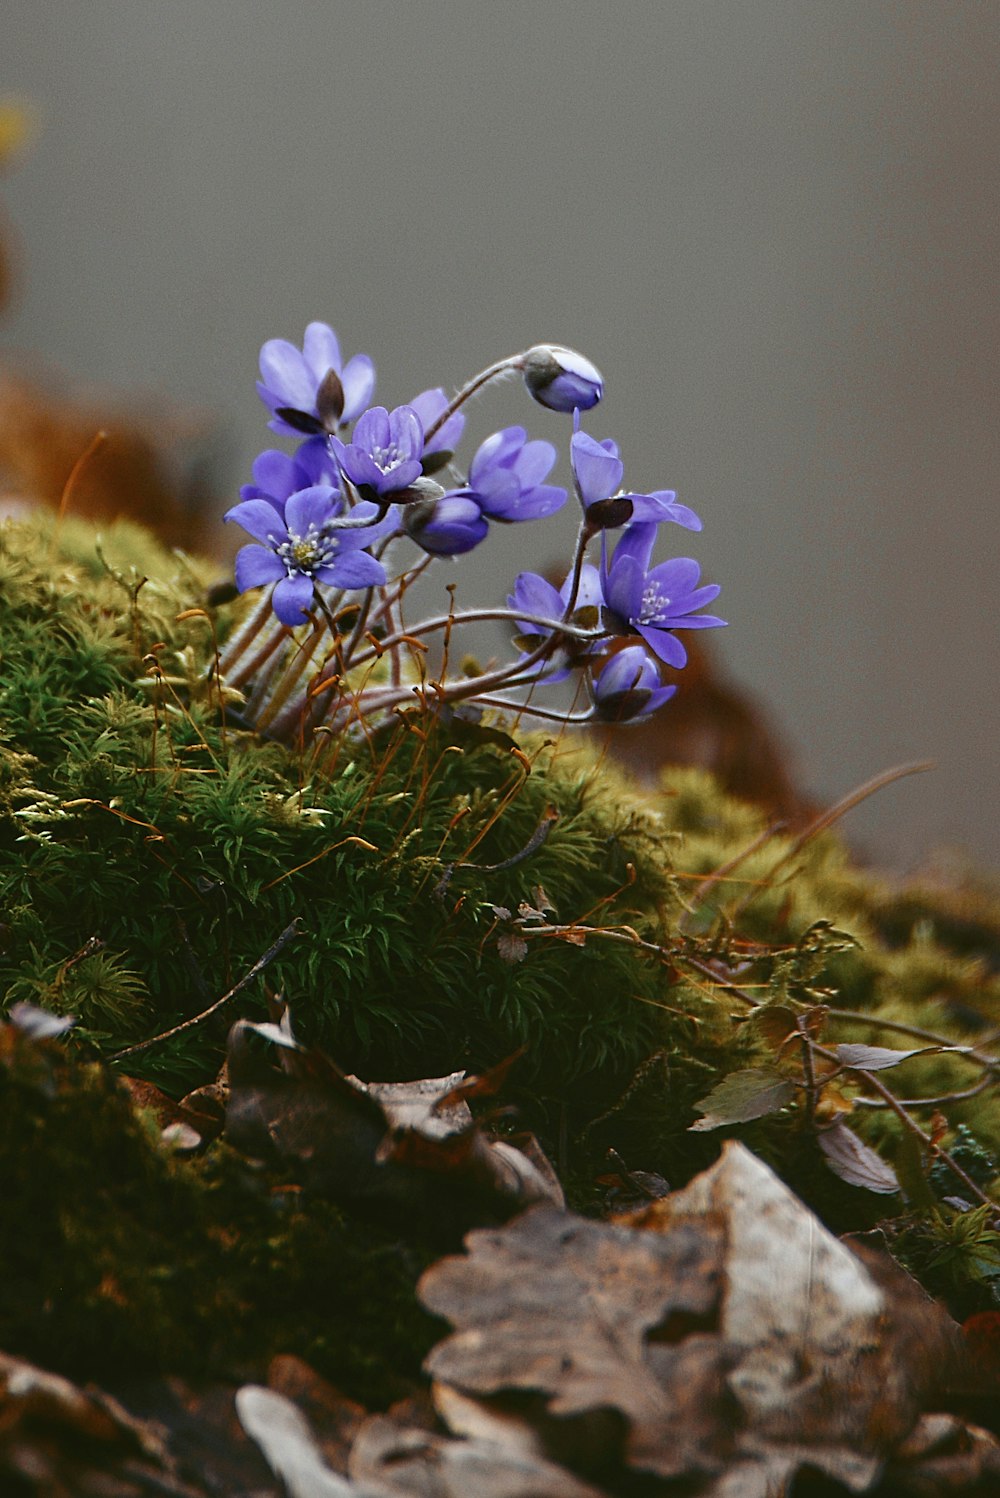 a close up of a purple flower on a mossy surface